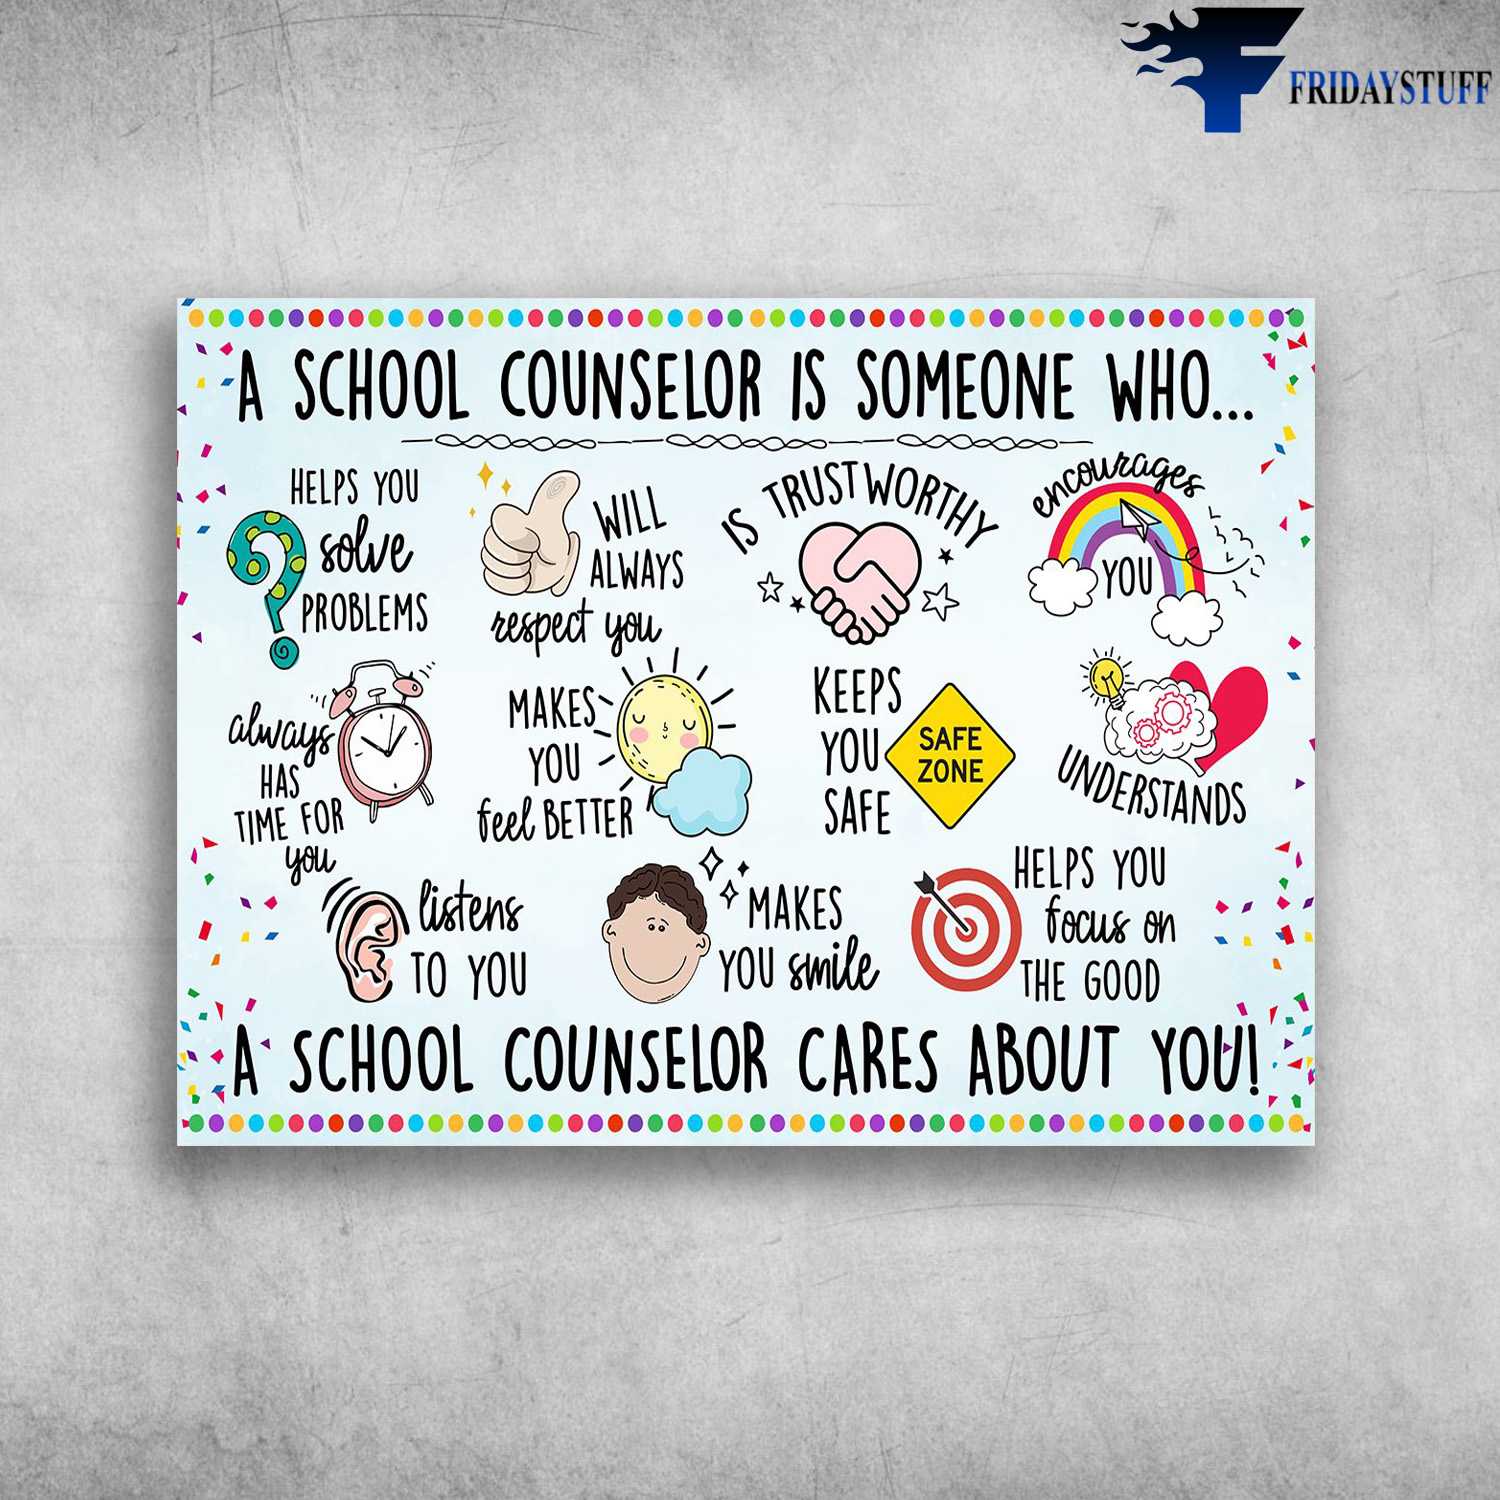 Back To School - A School Counselor Is Someone, Who Help You, Solve Problems, Will Always Respect You, Us Trust Worthy, Encourages You. Always Has Time For You, A School Counselor Cares About You